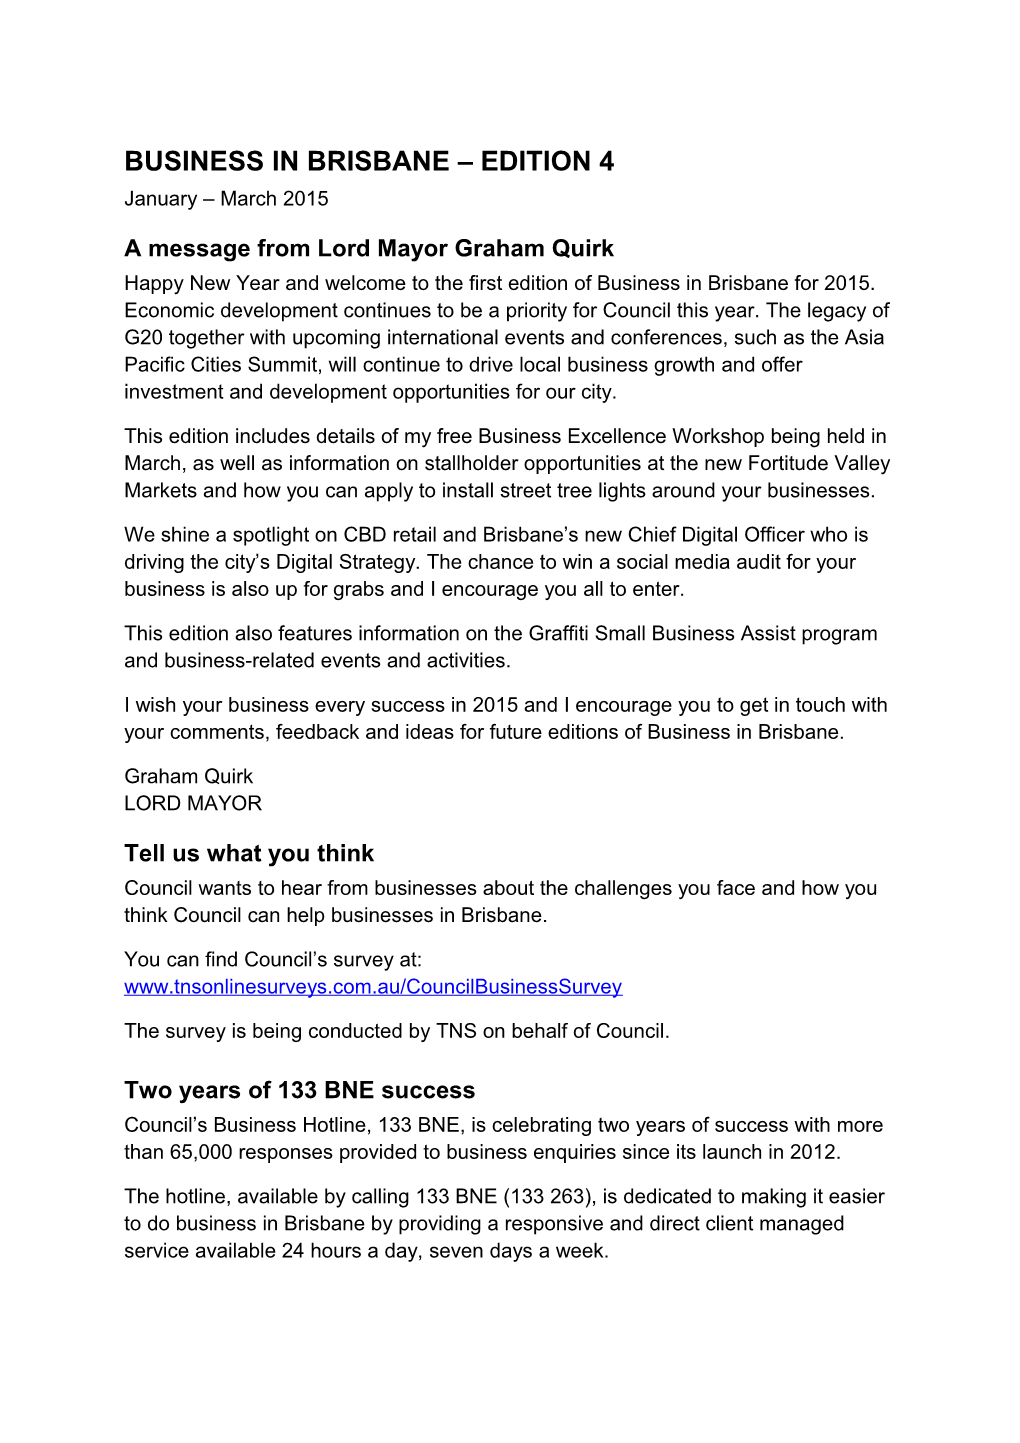 A Message from Lord Mayor Graham Quirk